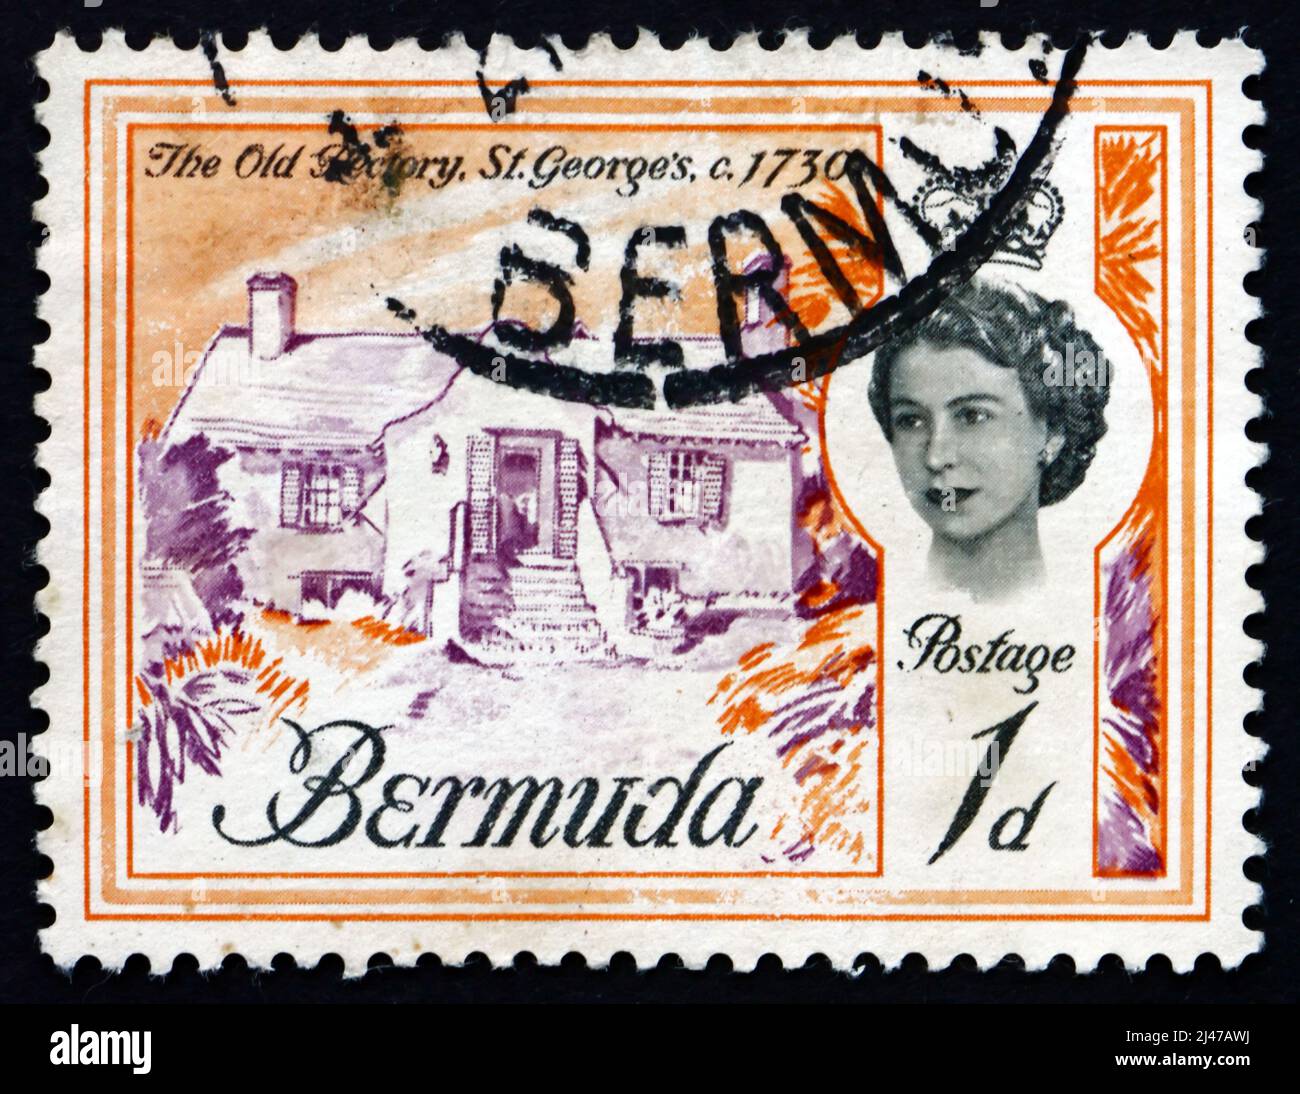 BERMUDA - CIRCA 1962: a stamp printed in Bermuda shows The Old Rectory, St. George's, 1730, circa 1962 Stock Photo